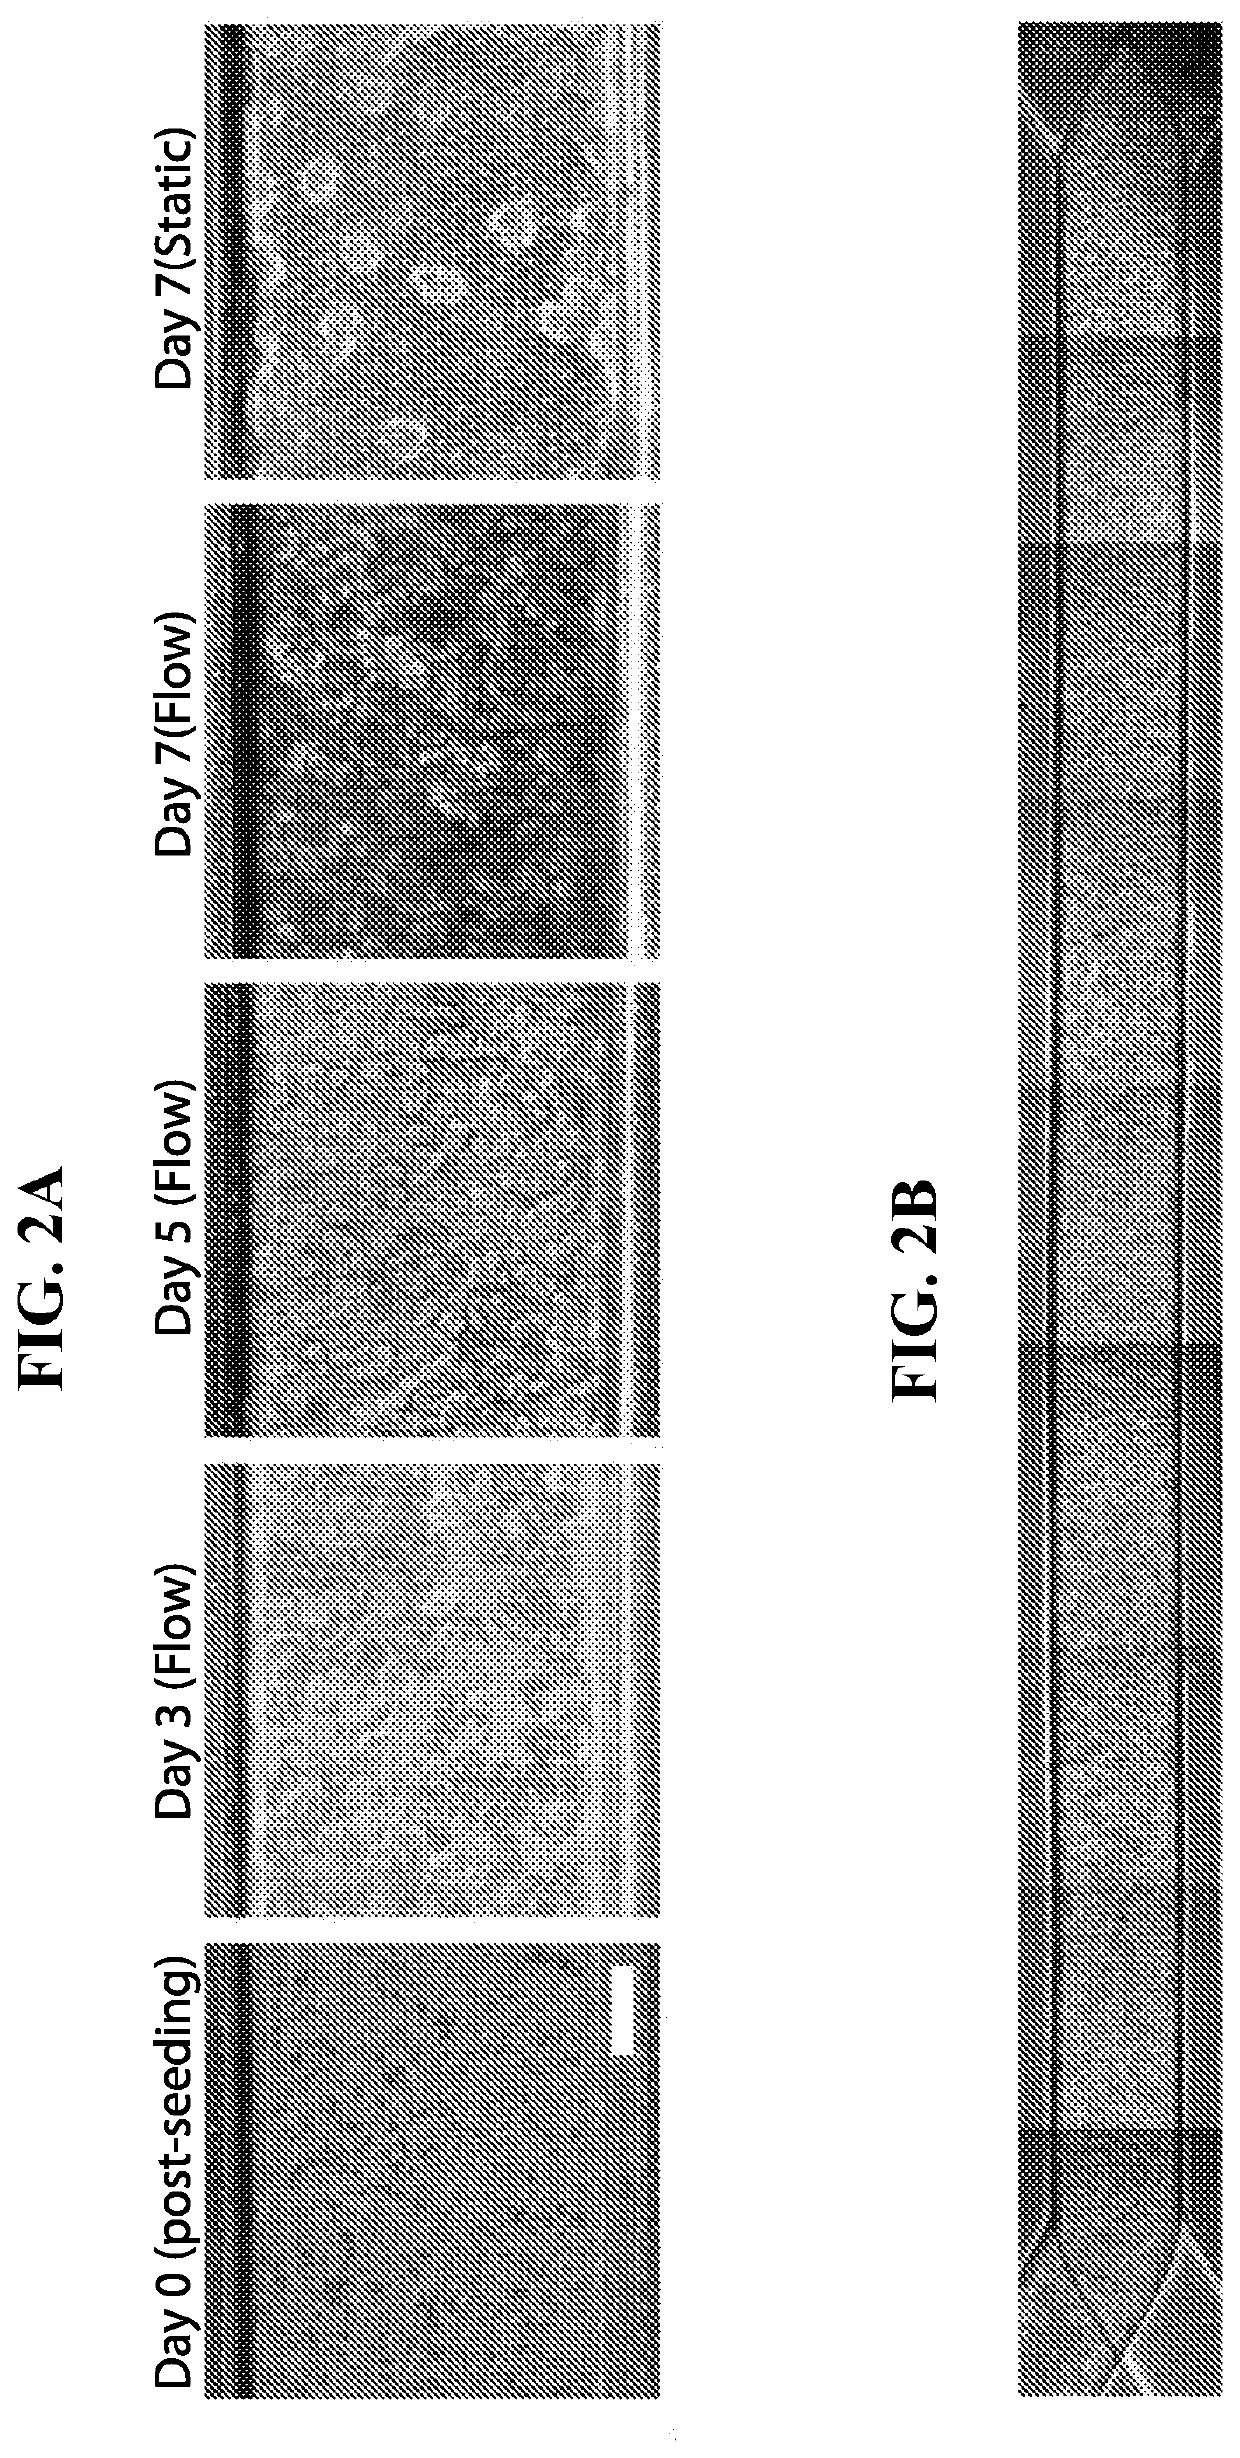 Systems and methods for growth of intestinal cells